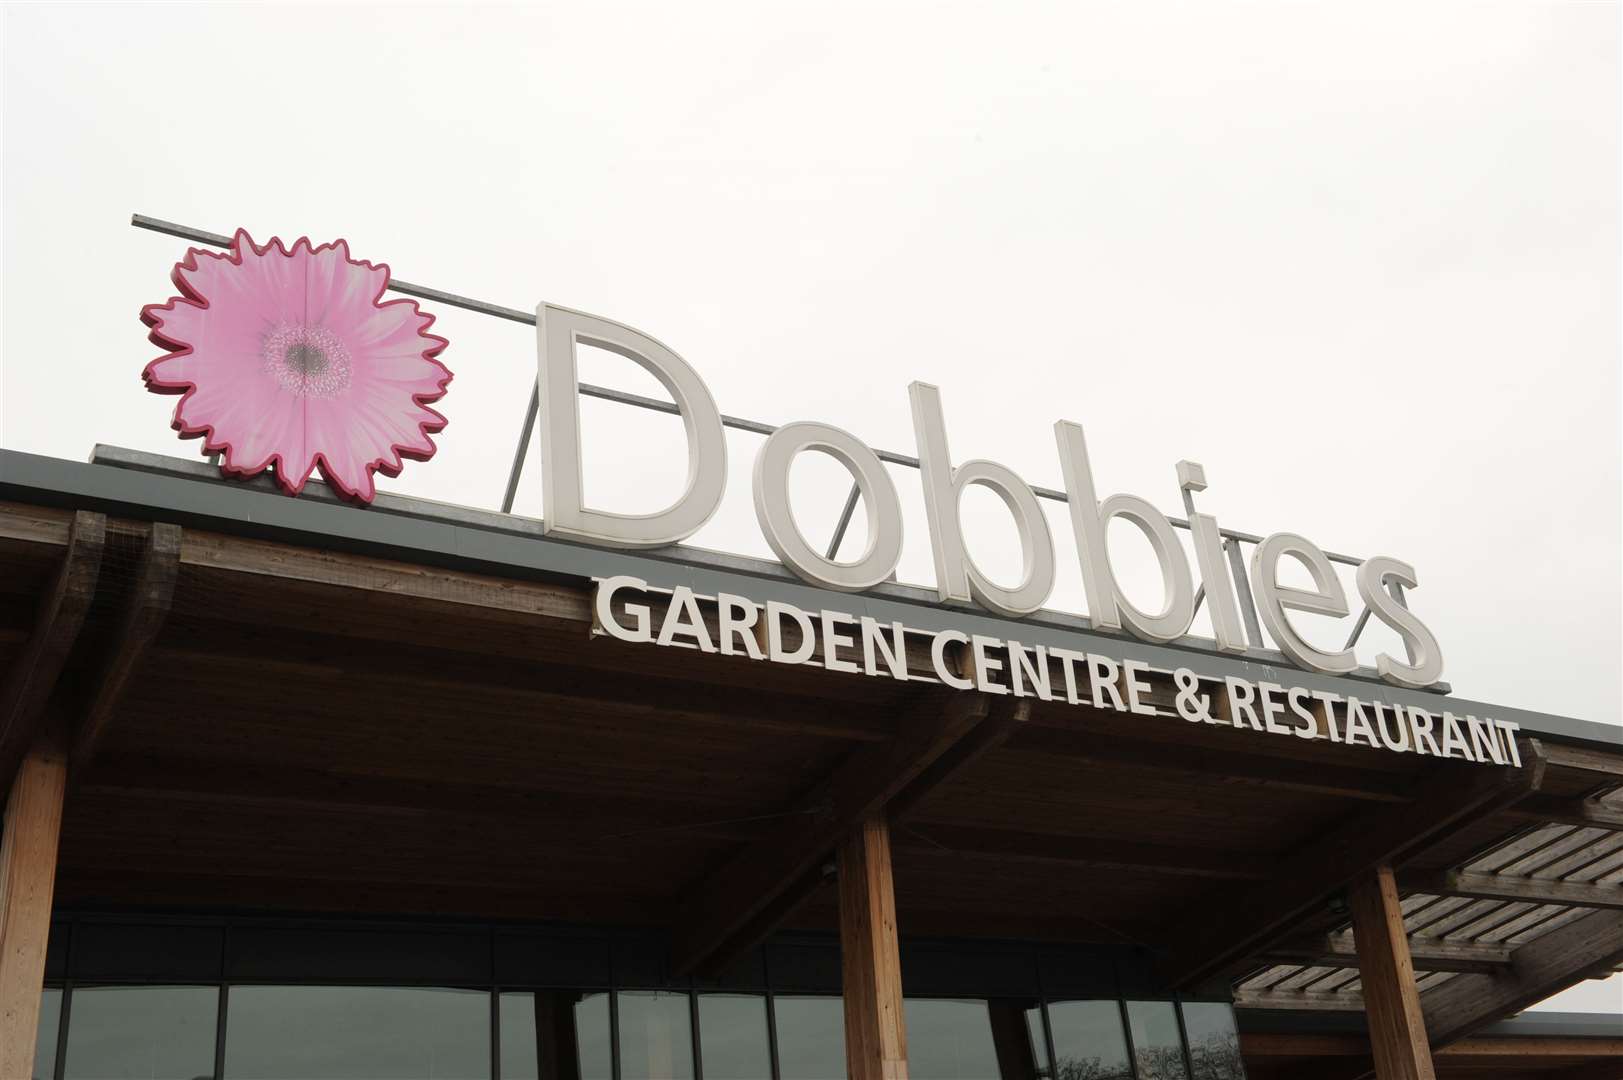 The Gillingham Dobbies will be welcoming customers on Wednesday